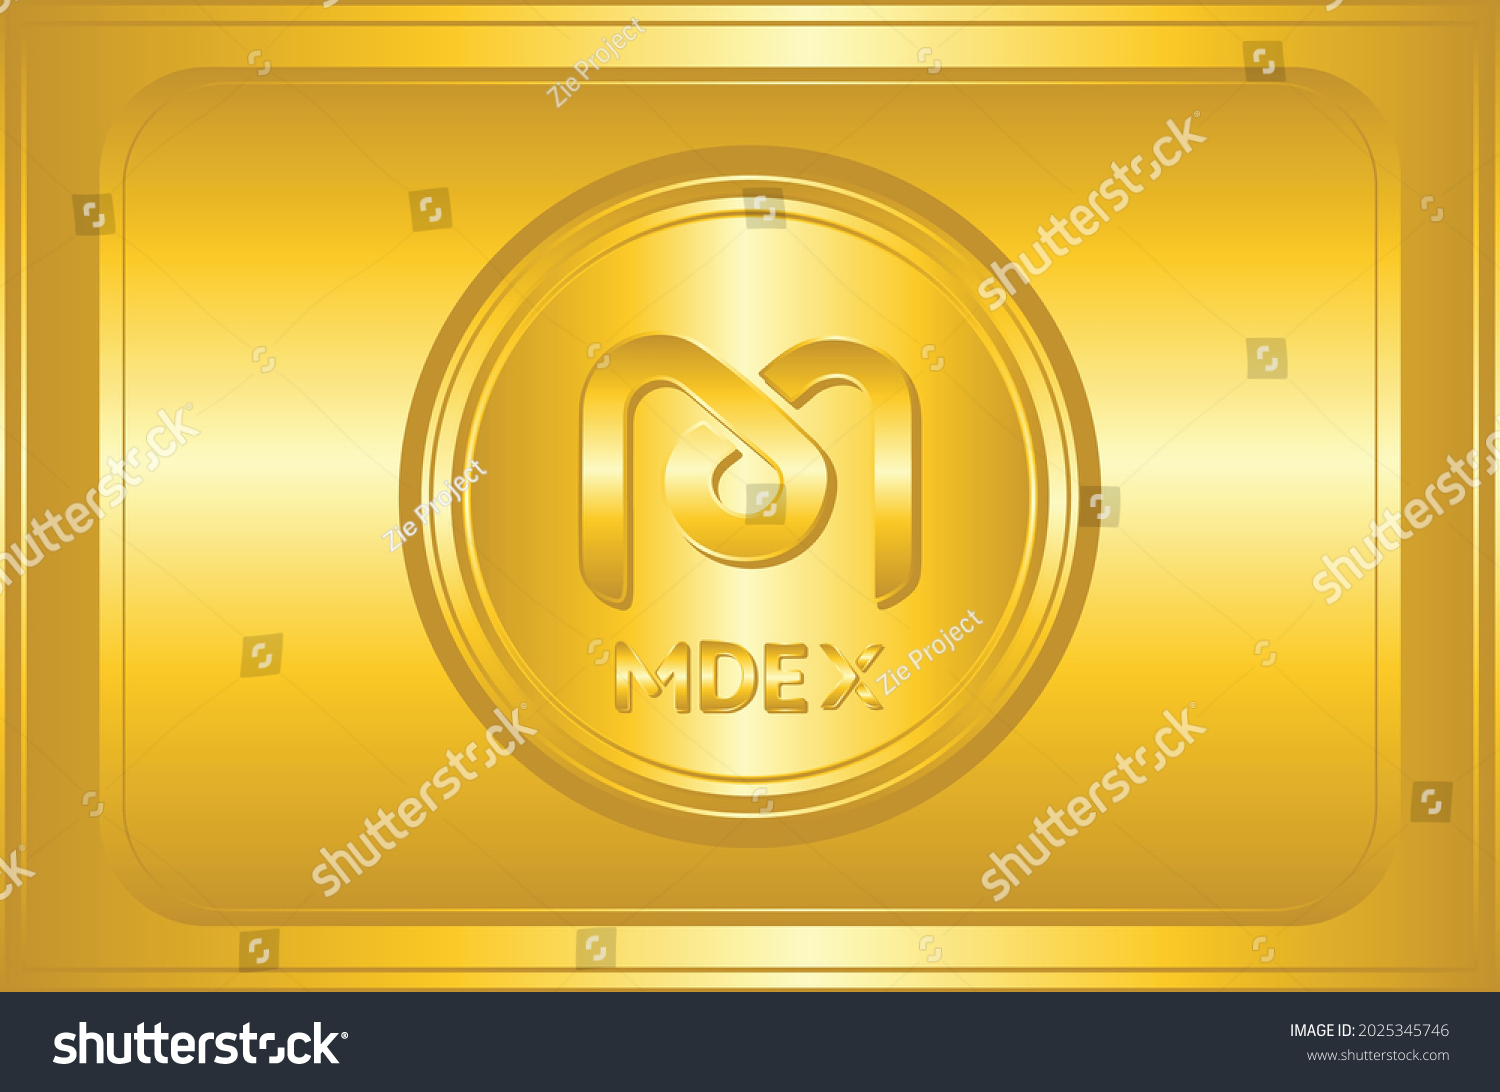 SVG of Mdex MDX token symbol cryptocurrency with golden button and golden plate background. Cryptocurrency logo icon for banner, poster, web or news. Vector illustration eps 10 svg